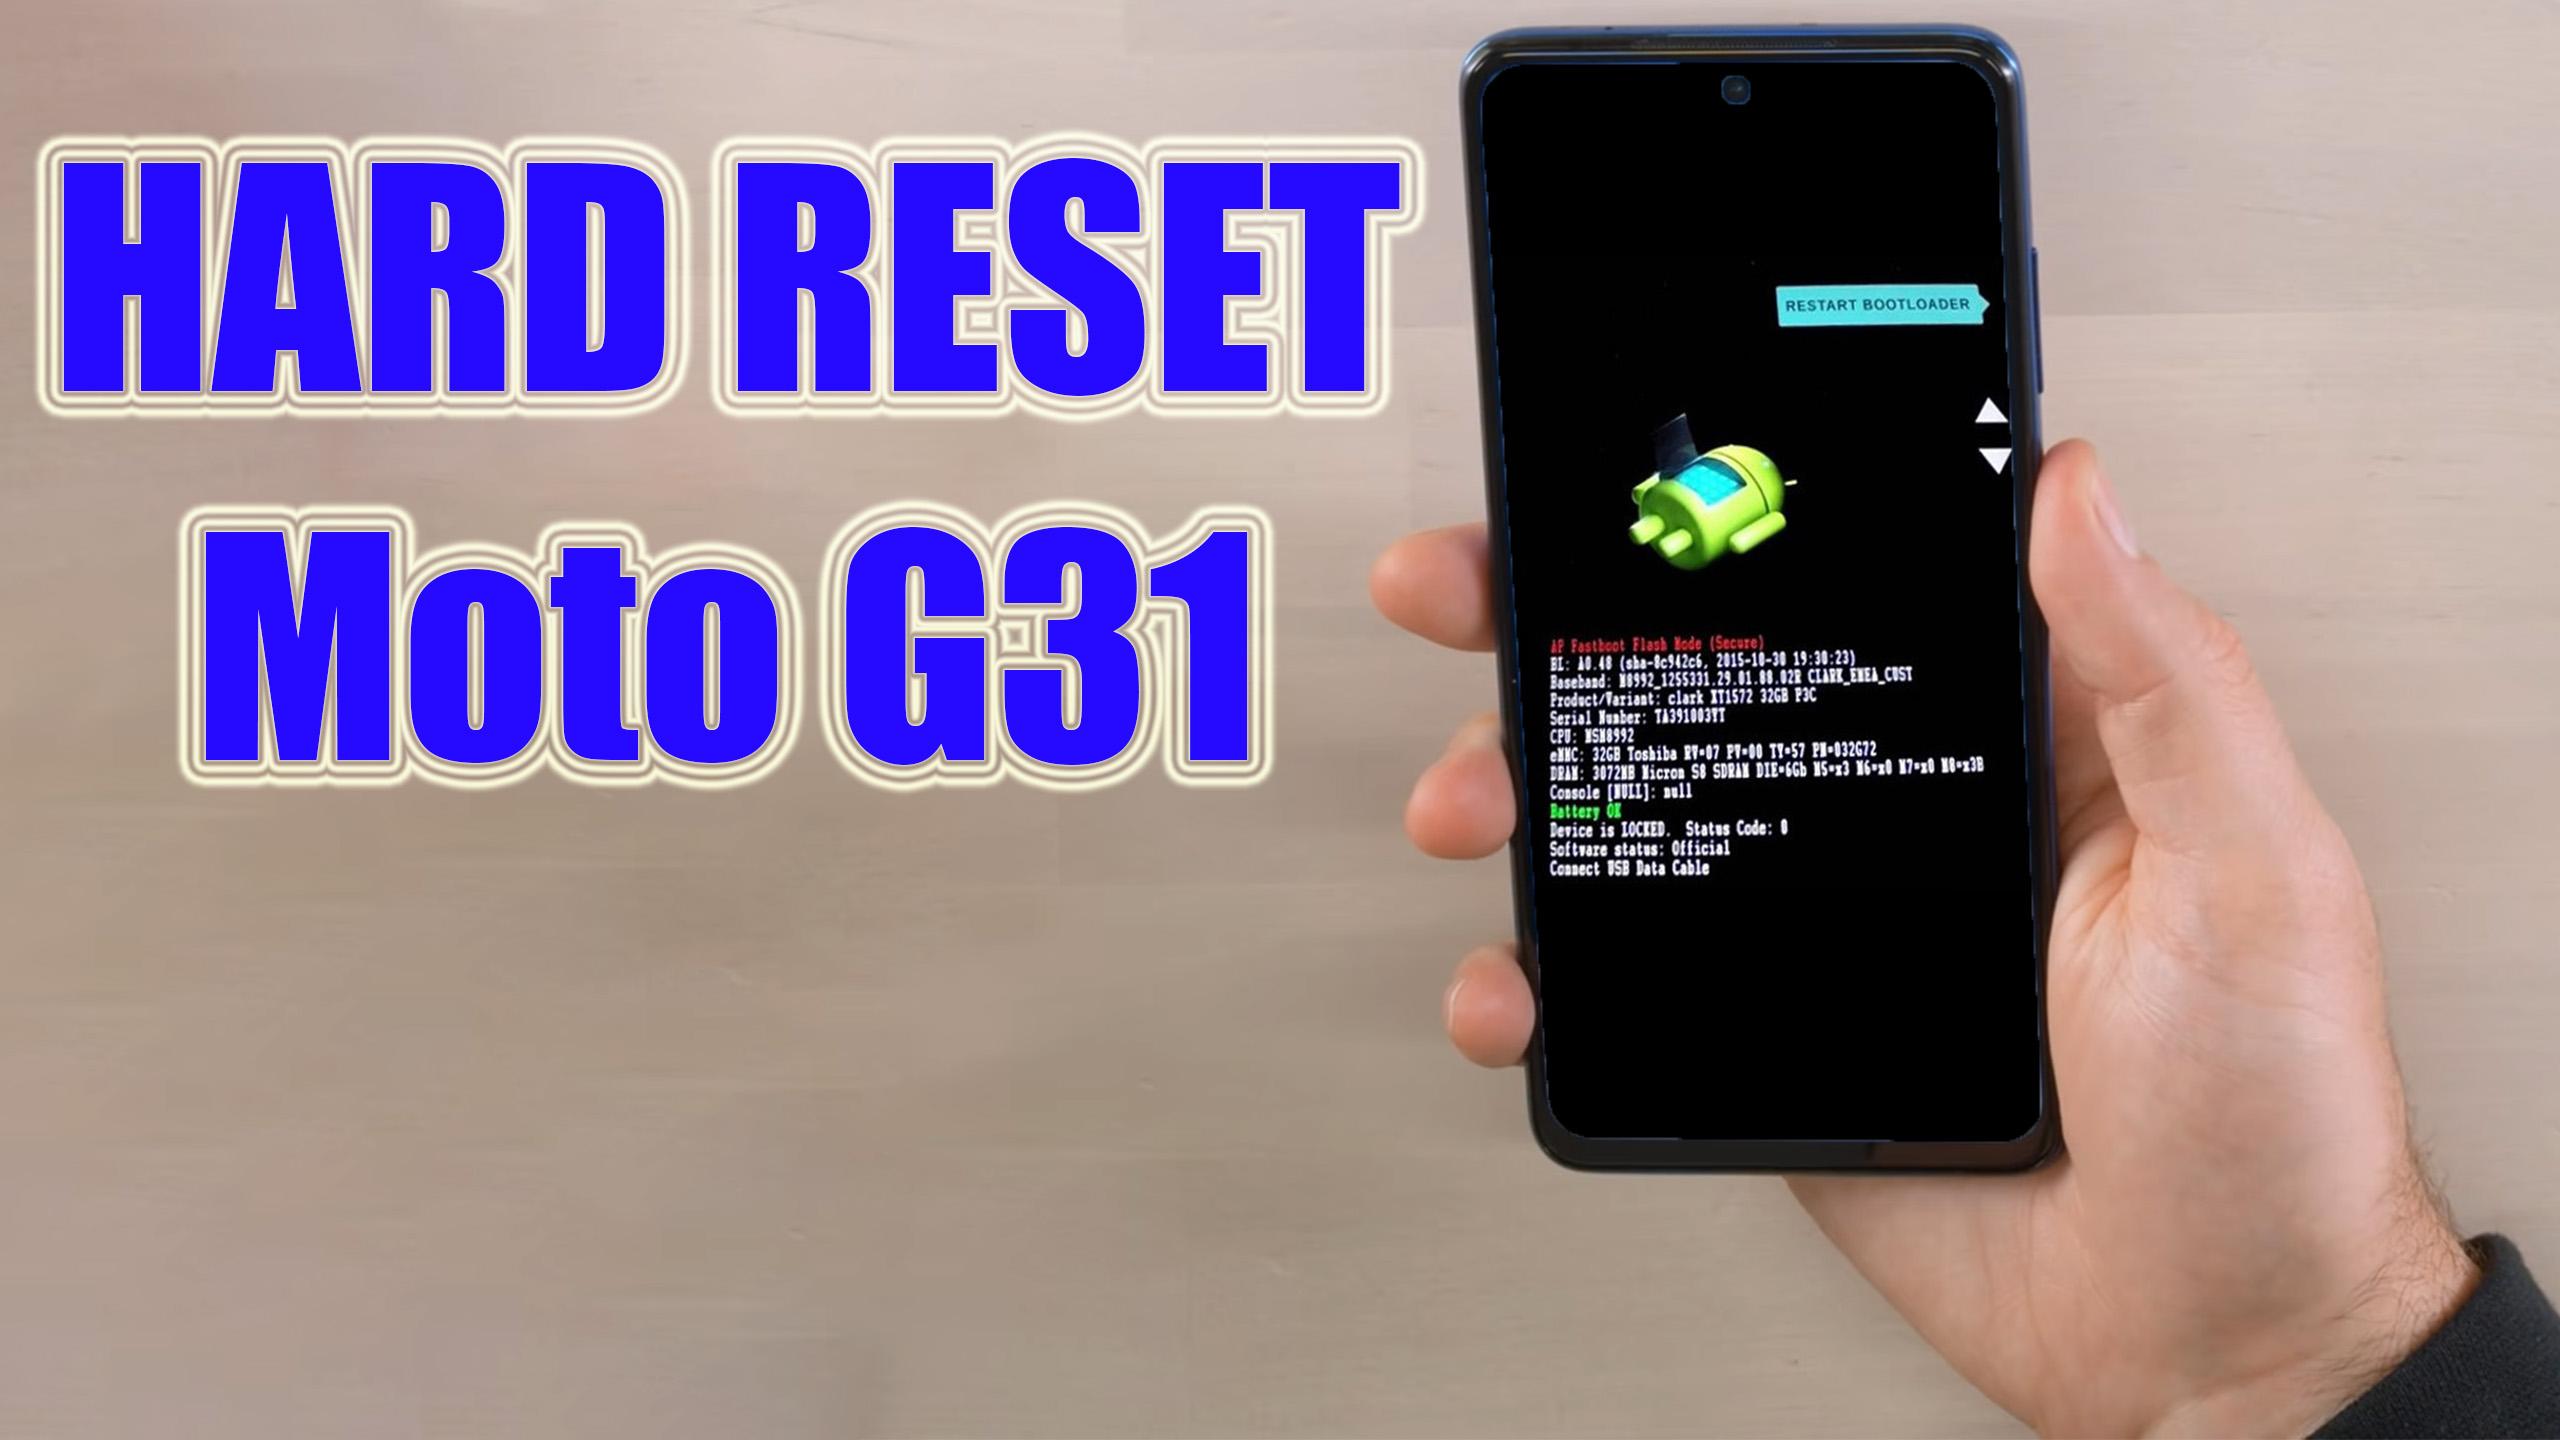 Moto g pure factory reset without password